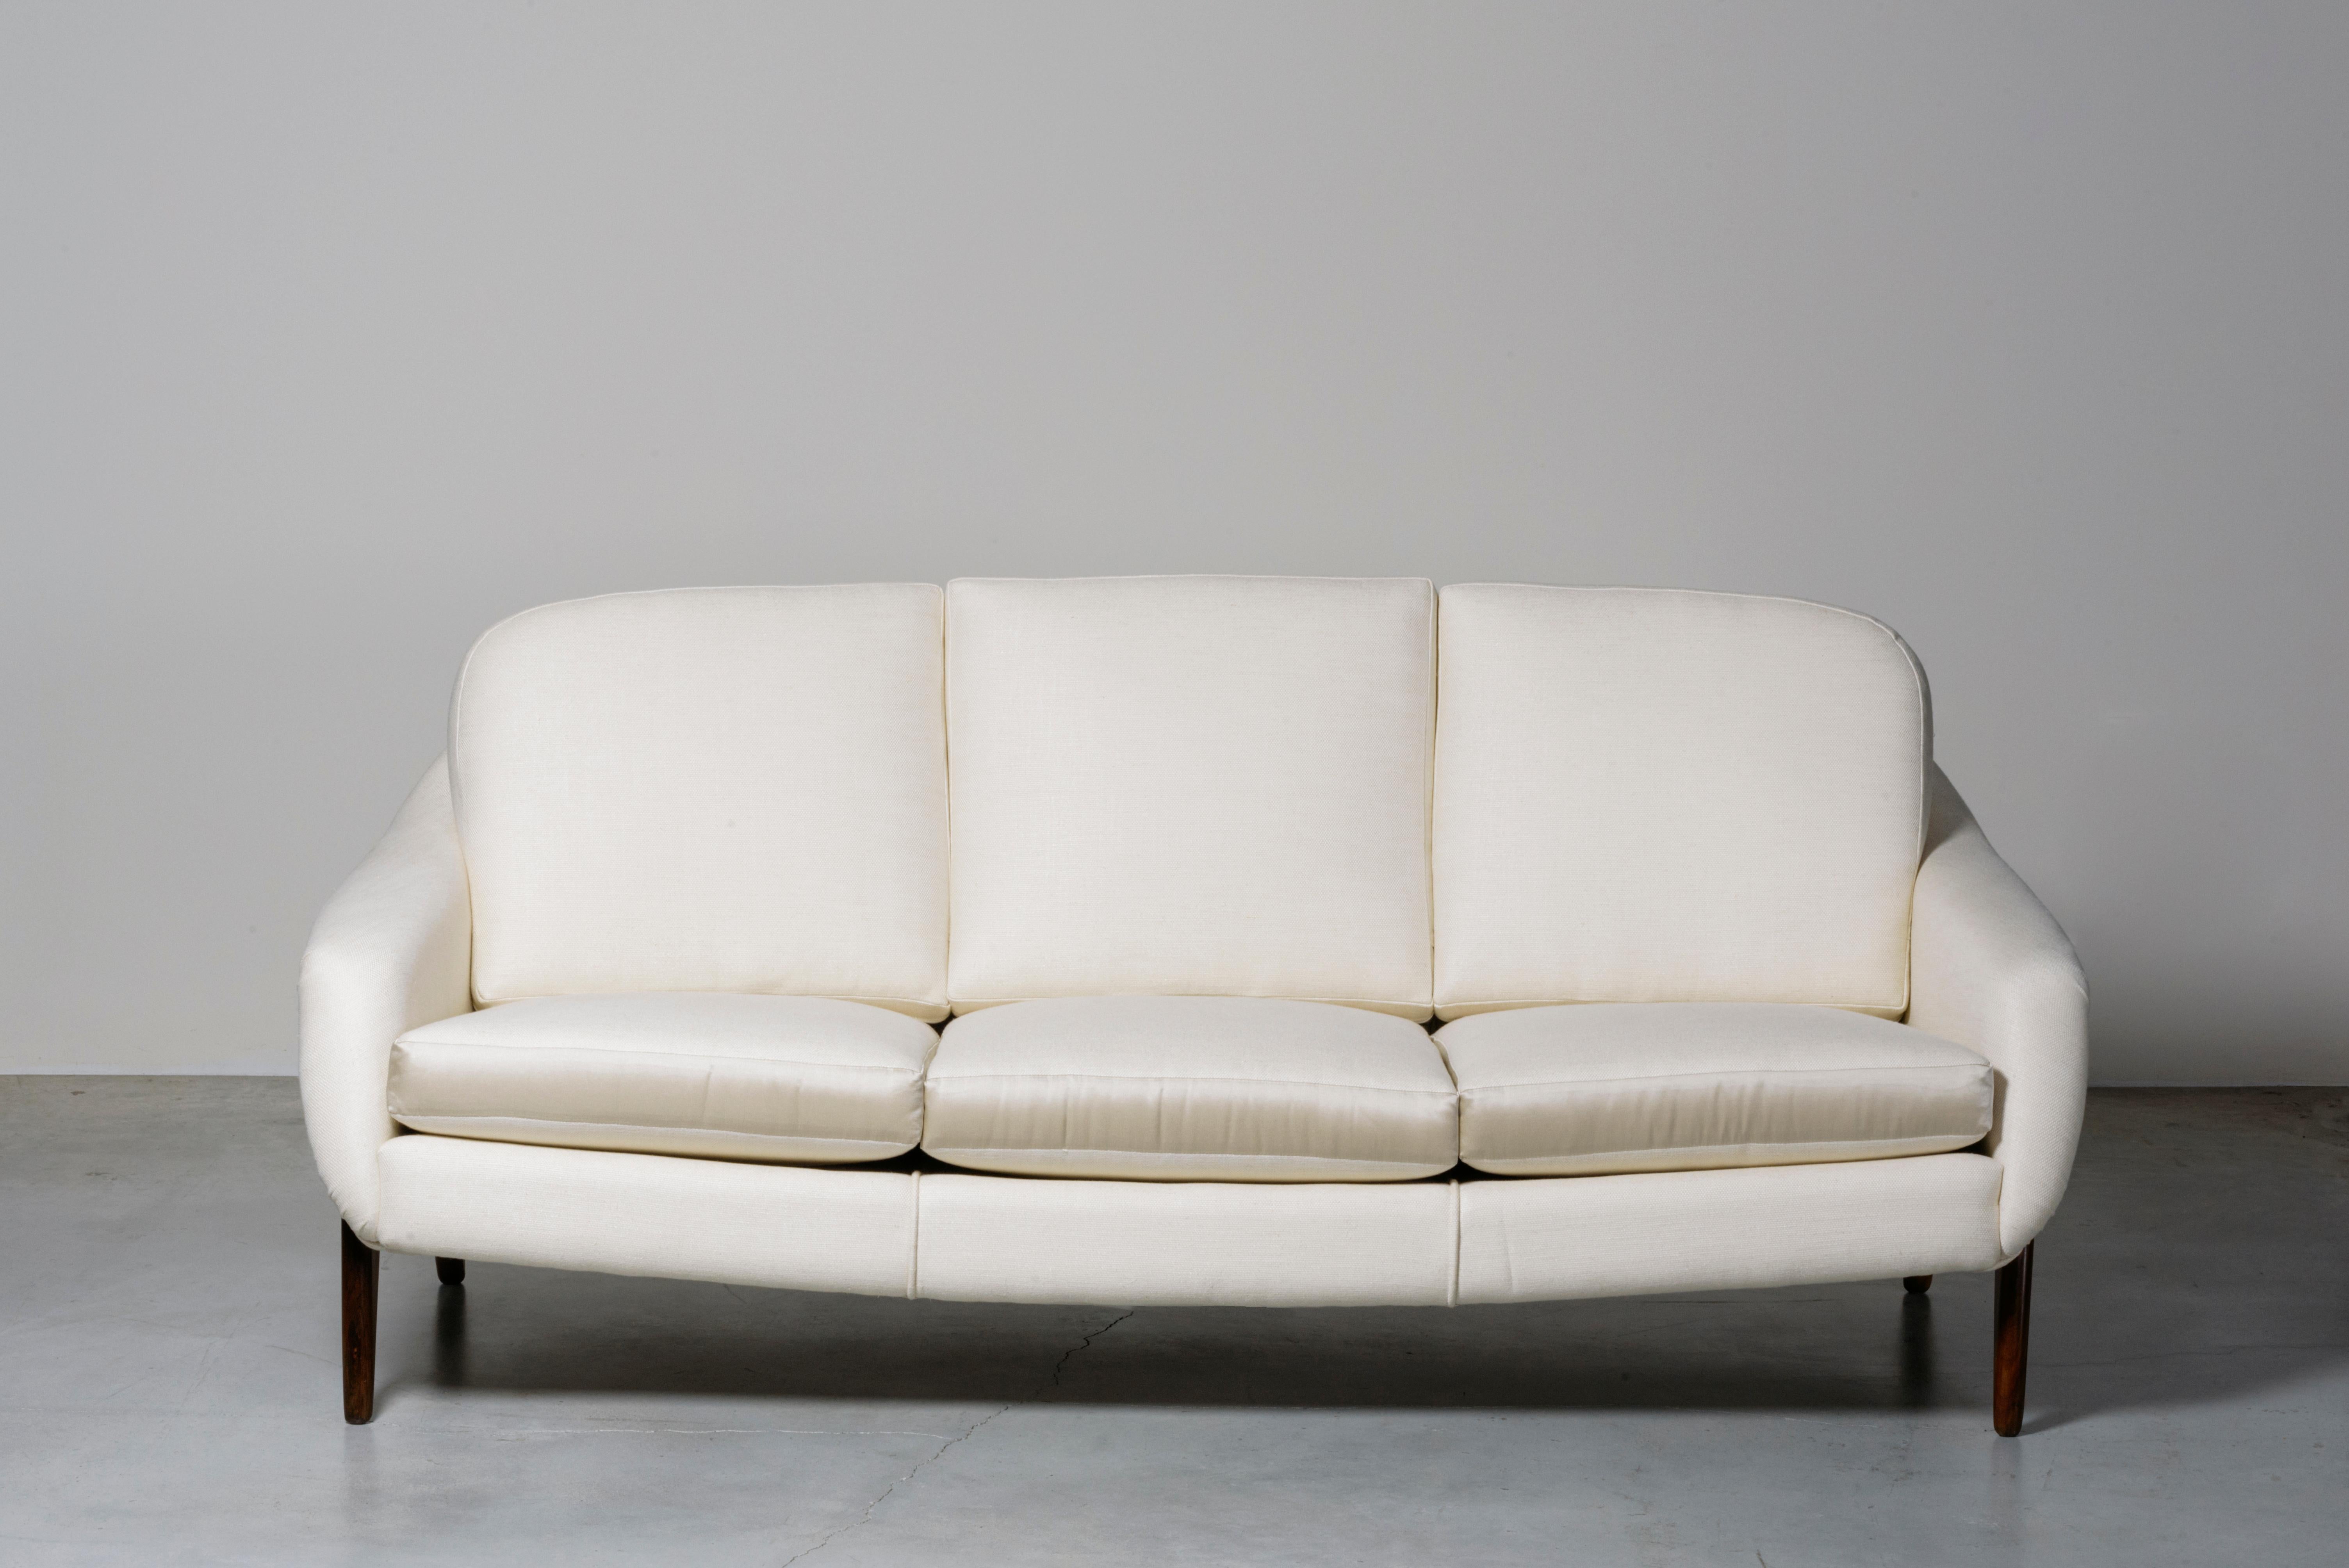 Stella sofa by Sergio Rodrigues. Brazil, 1965.
Manufactured by Oca. Example provided with Brazilian Government fiscal stamp. Solid wood, fabric upholstery. Measures: 190 x 90 x H 76 seat H 35 cm. 74.9 x 35.5 x H 29.9 seat H 13.8 in.
Literature: